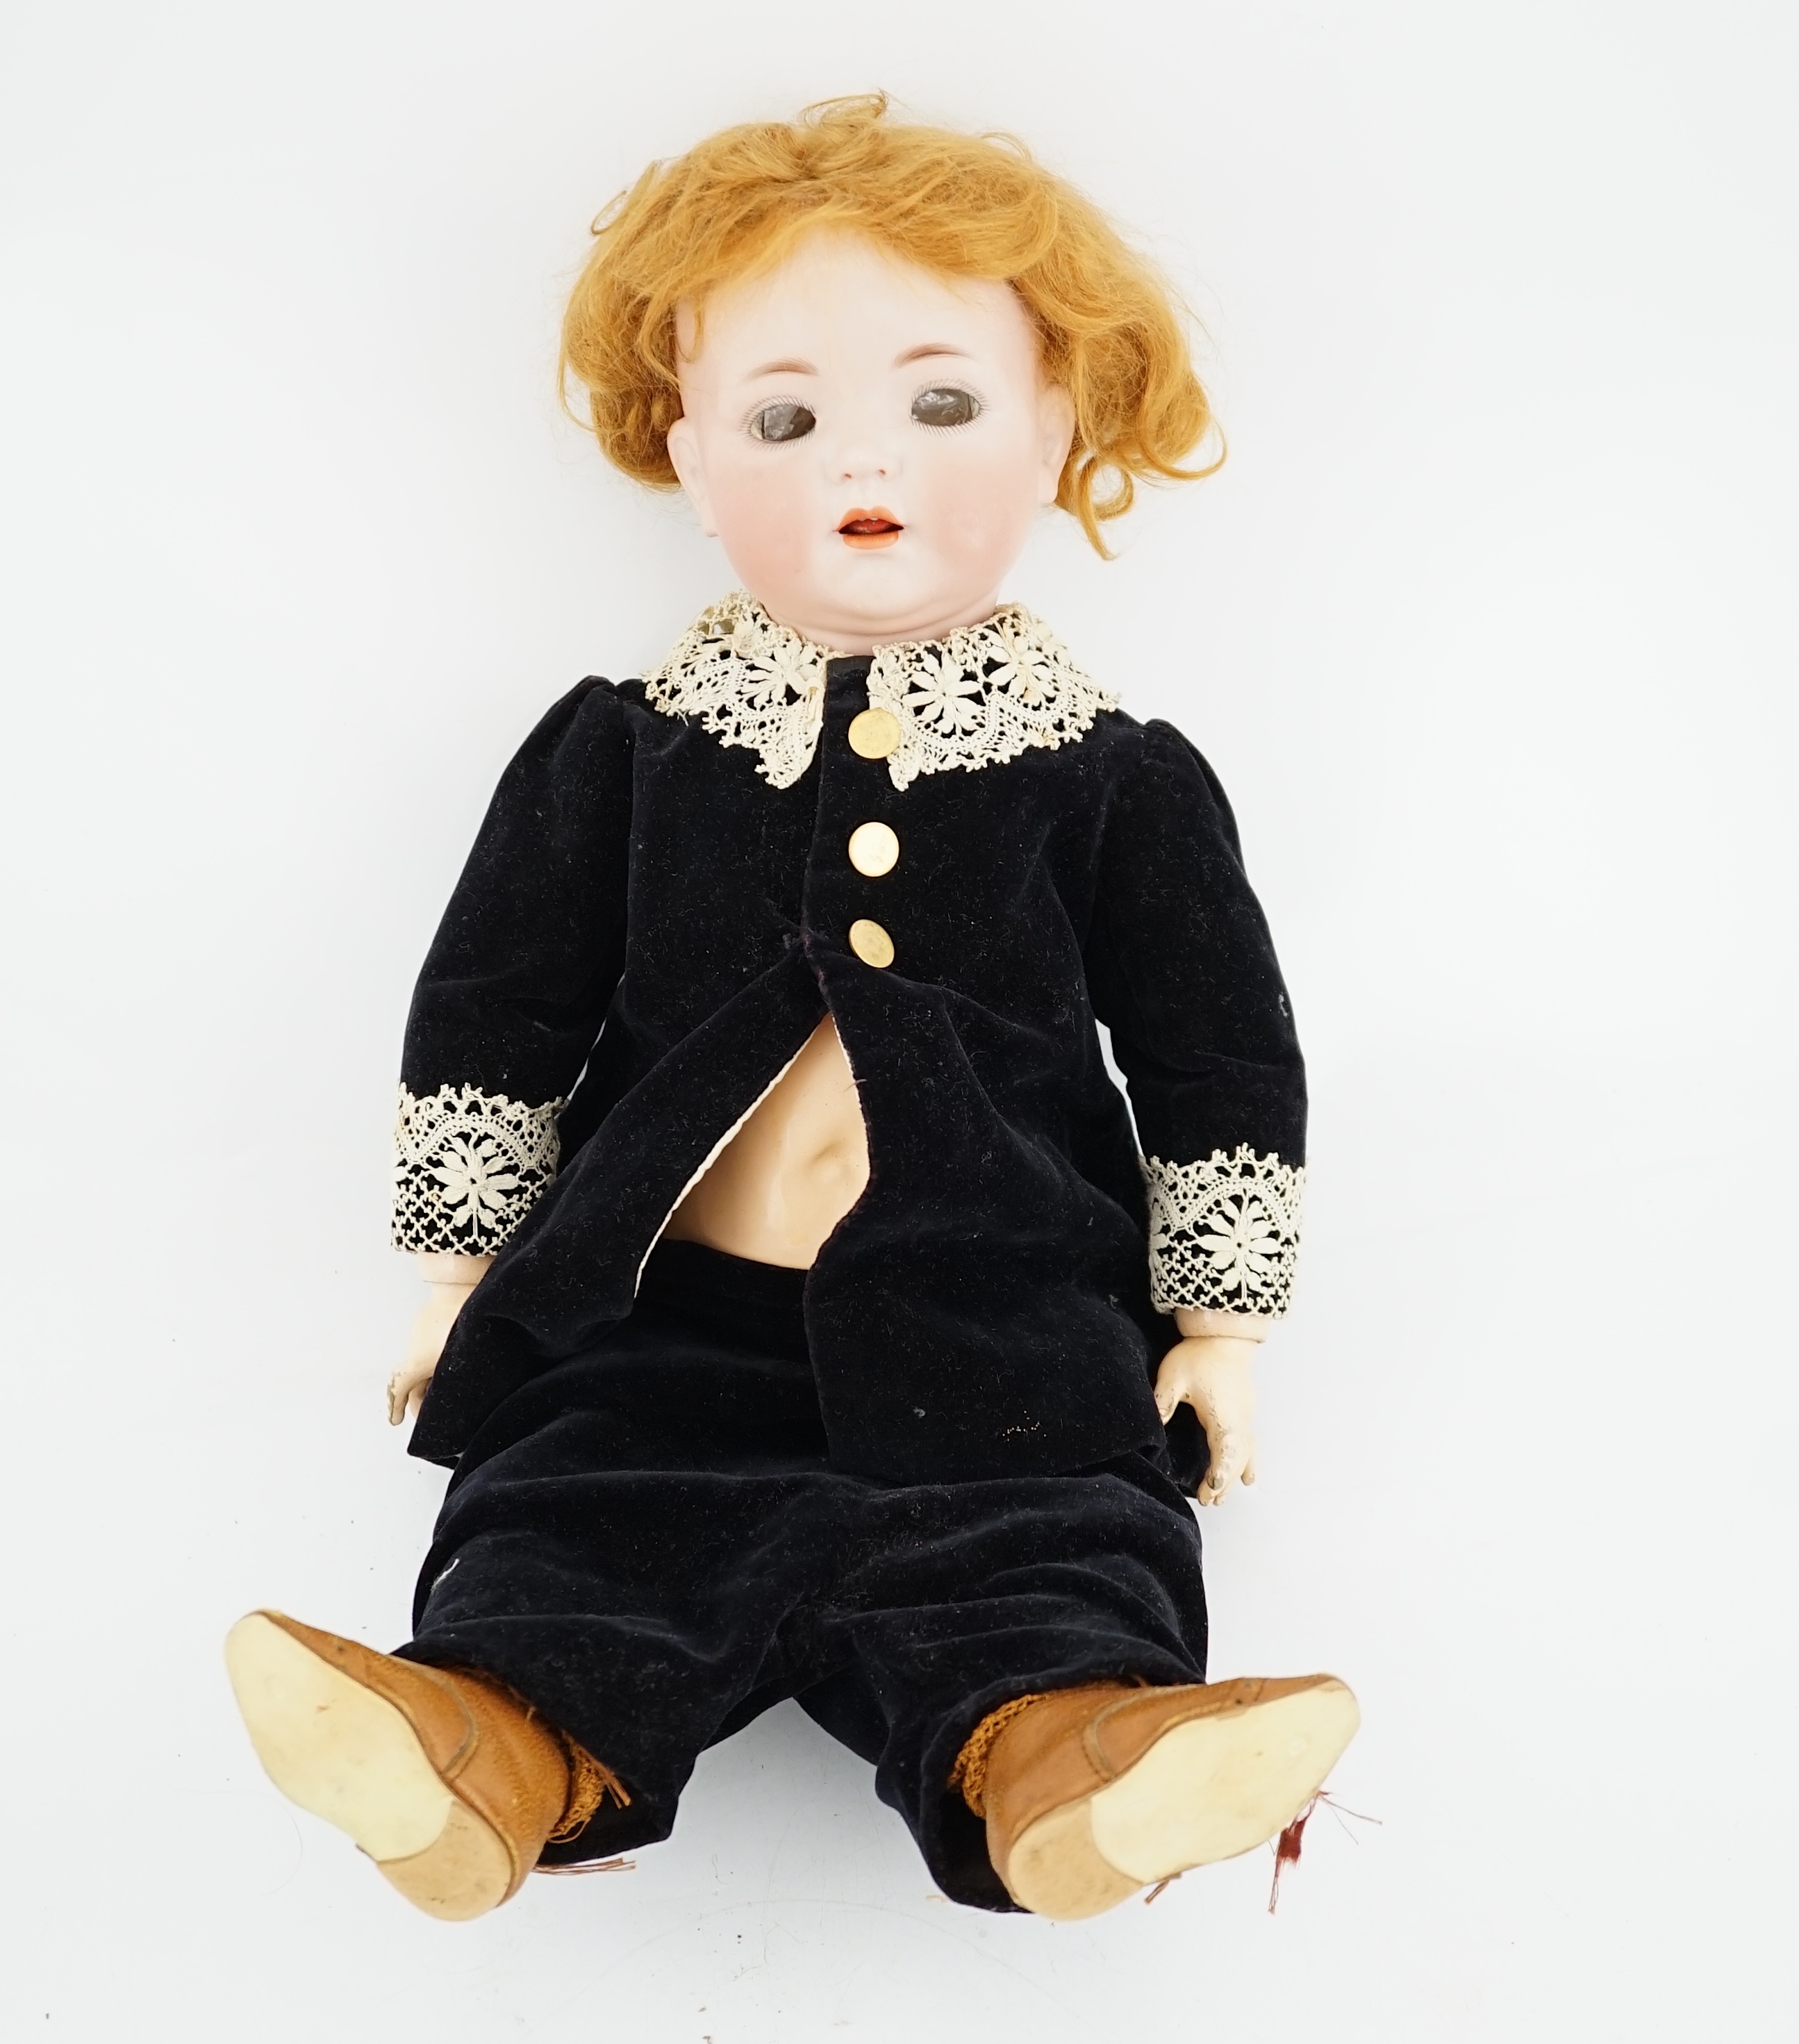 A K&R Kammer & Reinhart /S & H bisque 121 head doll on toddler body, with vintage shoes and socks, 49cm, in excellent condition, eyes detached in head, not broken